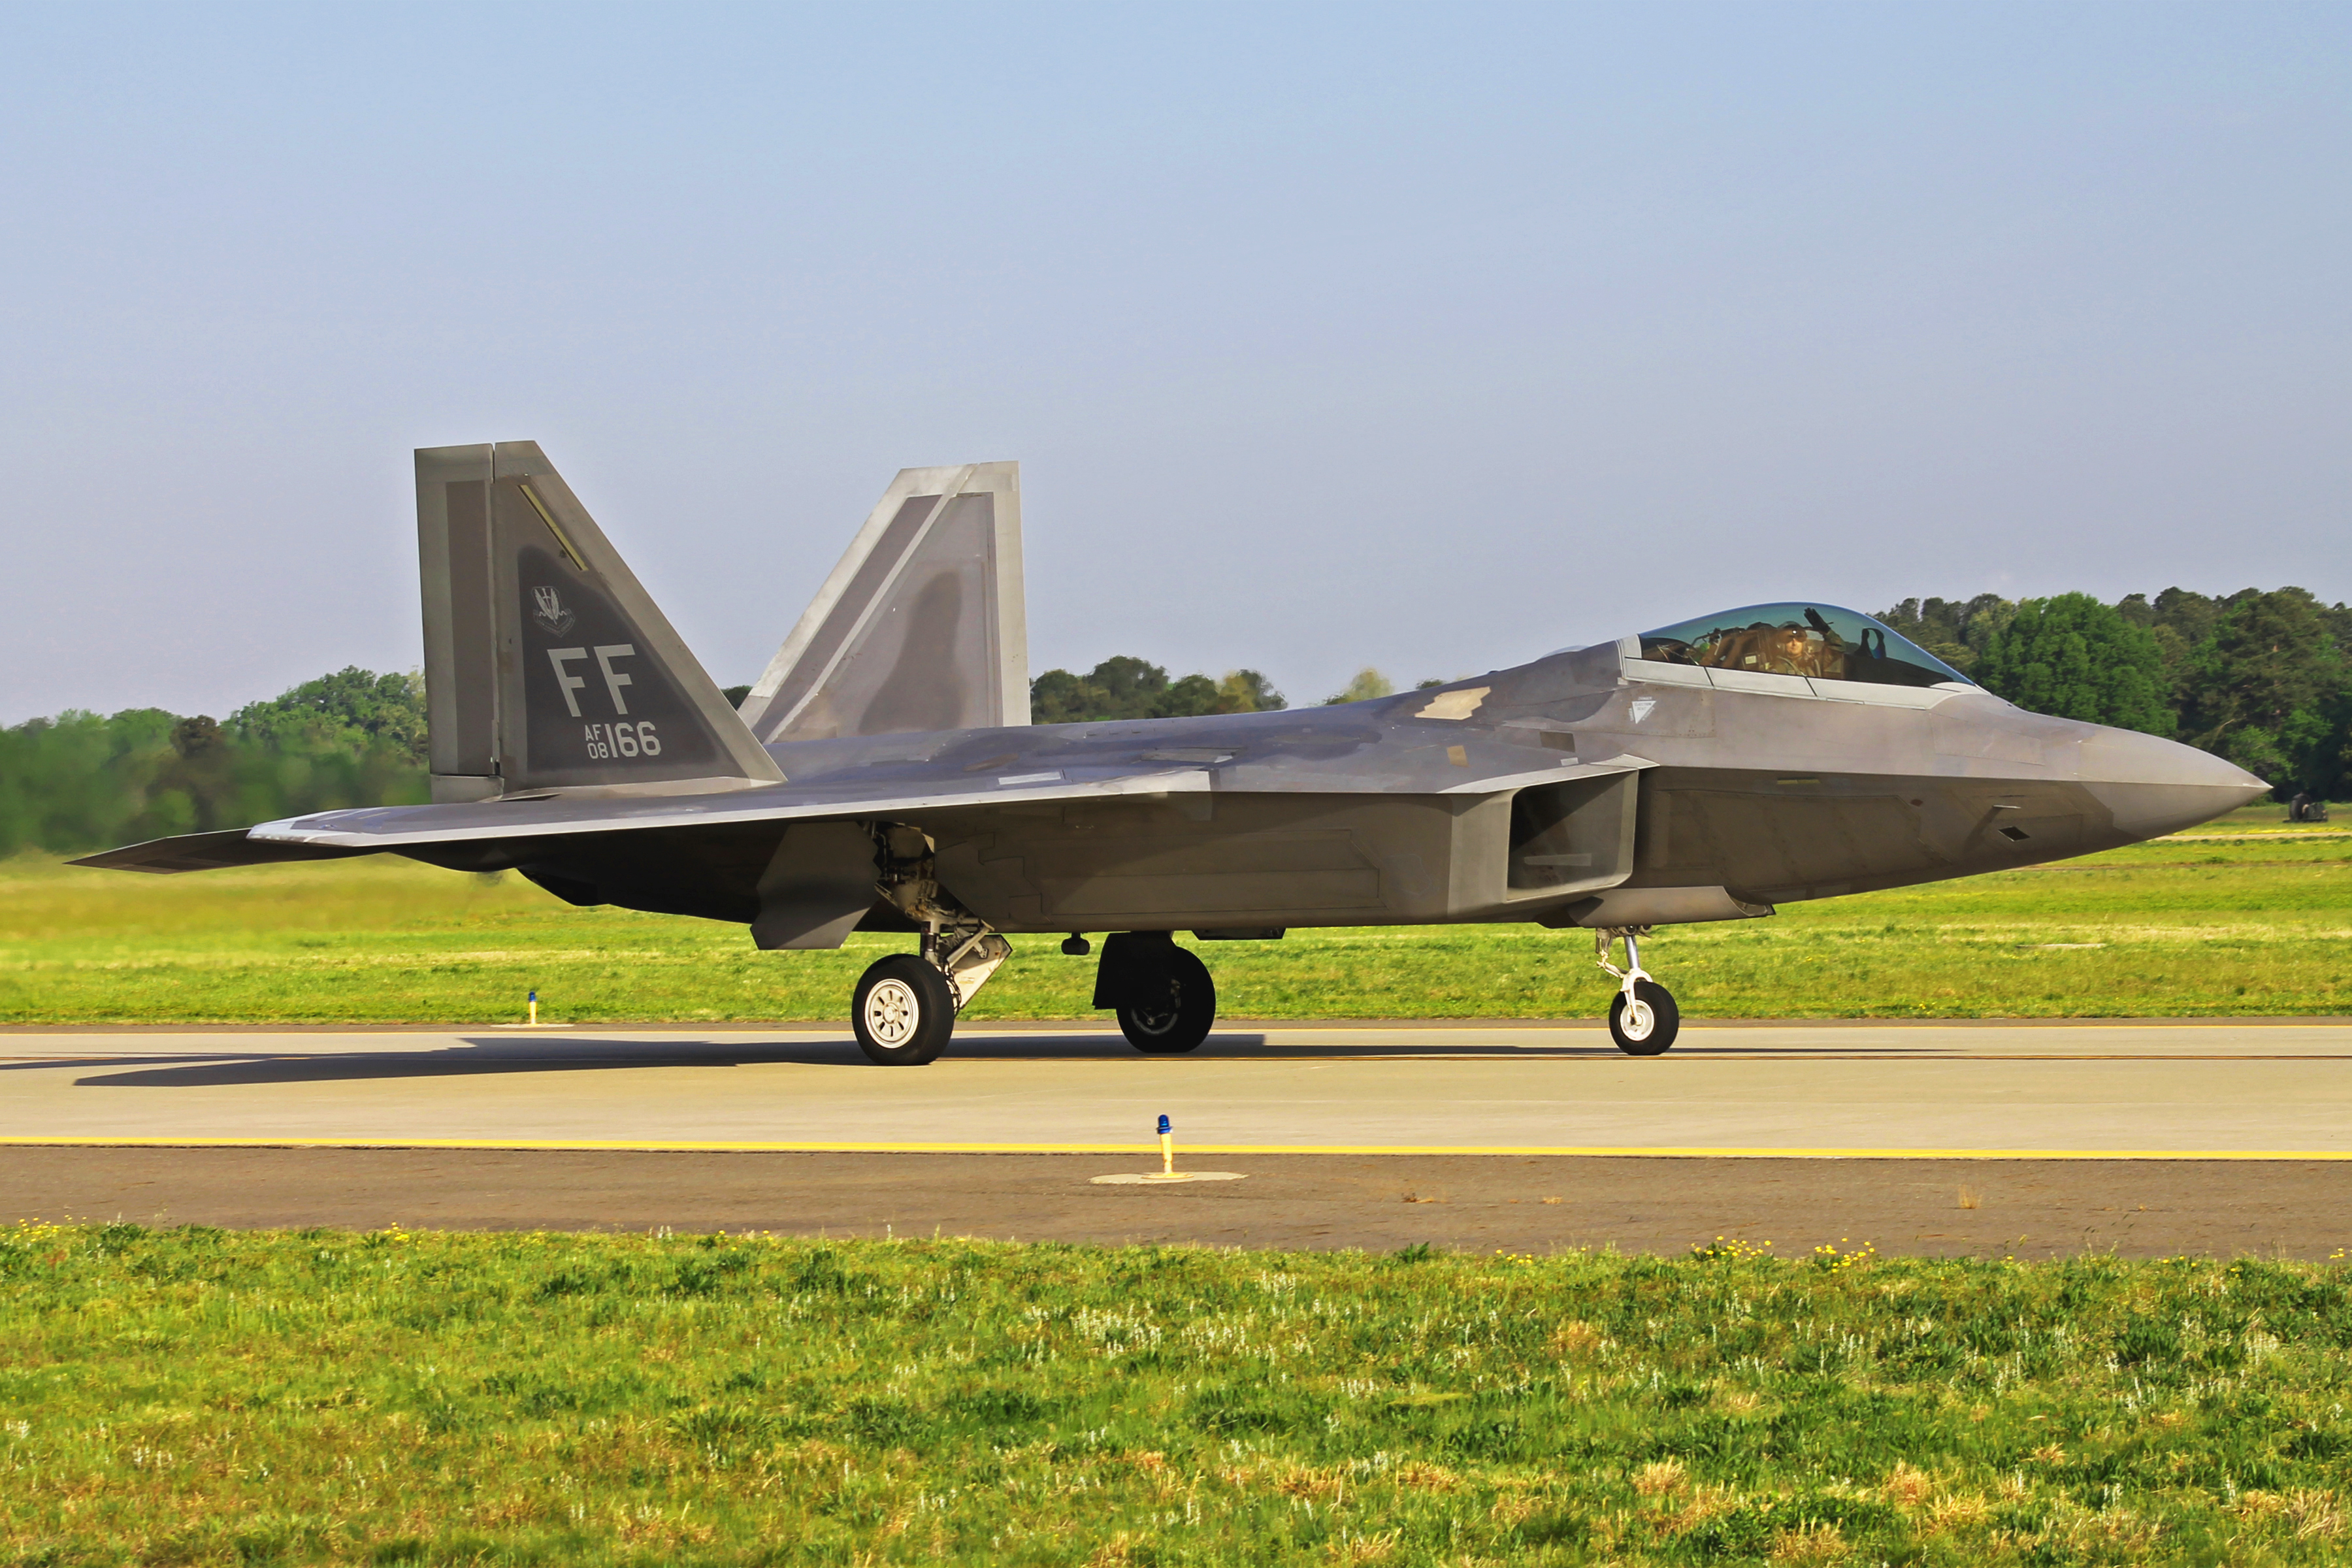 F-22 Raptor from the USAF's Air Combat Command